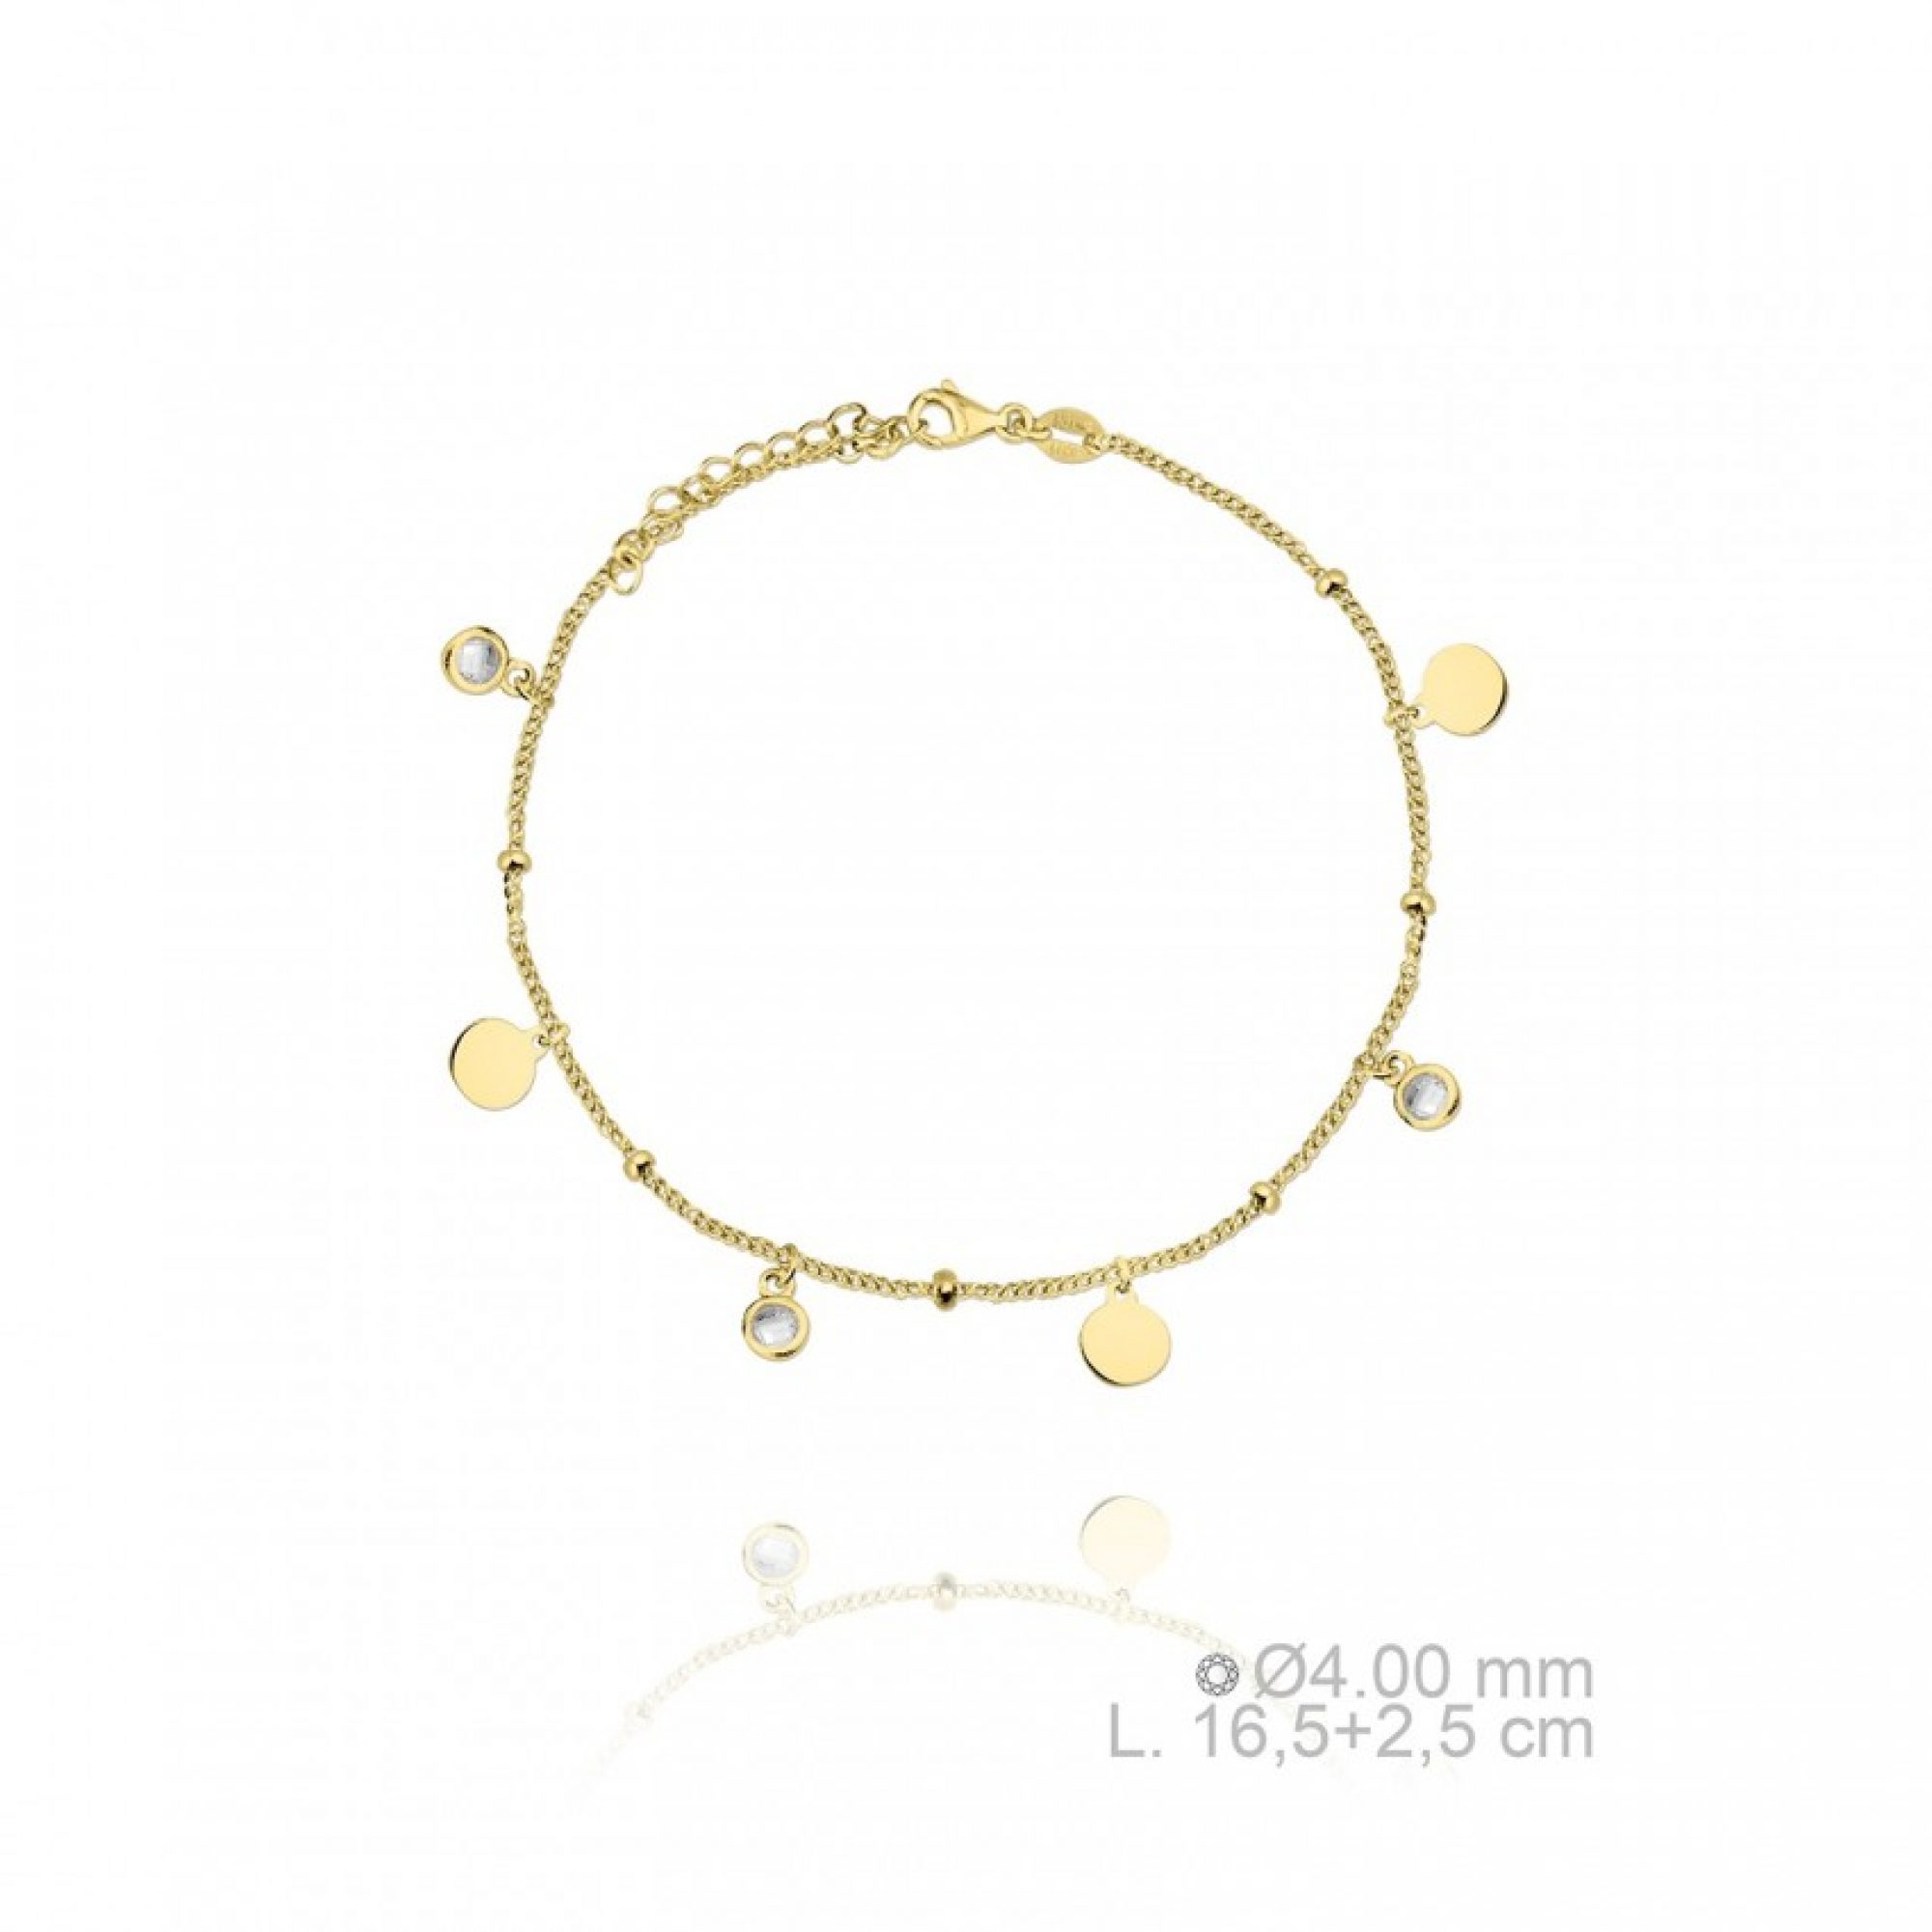 Gold plated bracelet with dangles and zircon stones 